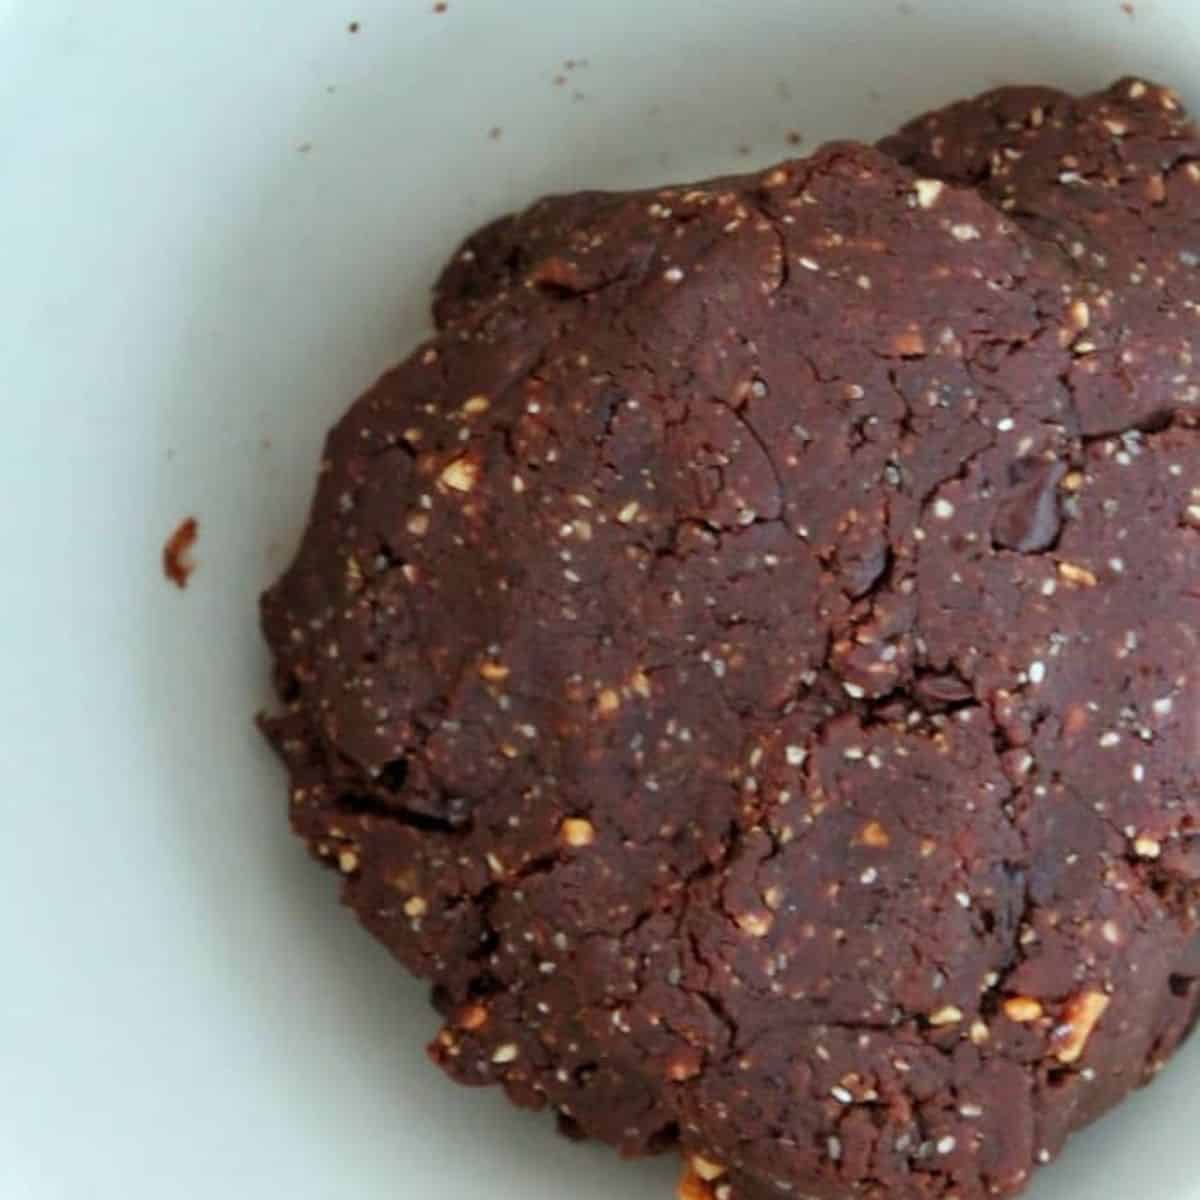 peanut butter chocolate protein ball dough in a bowl.